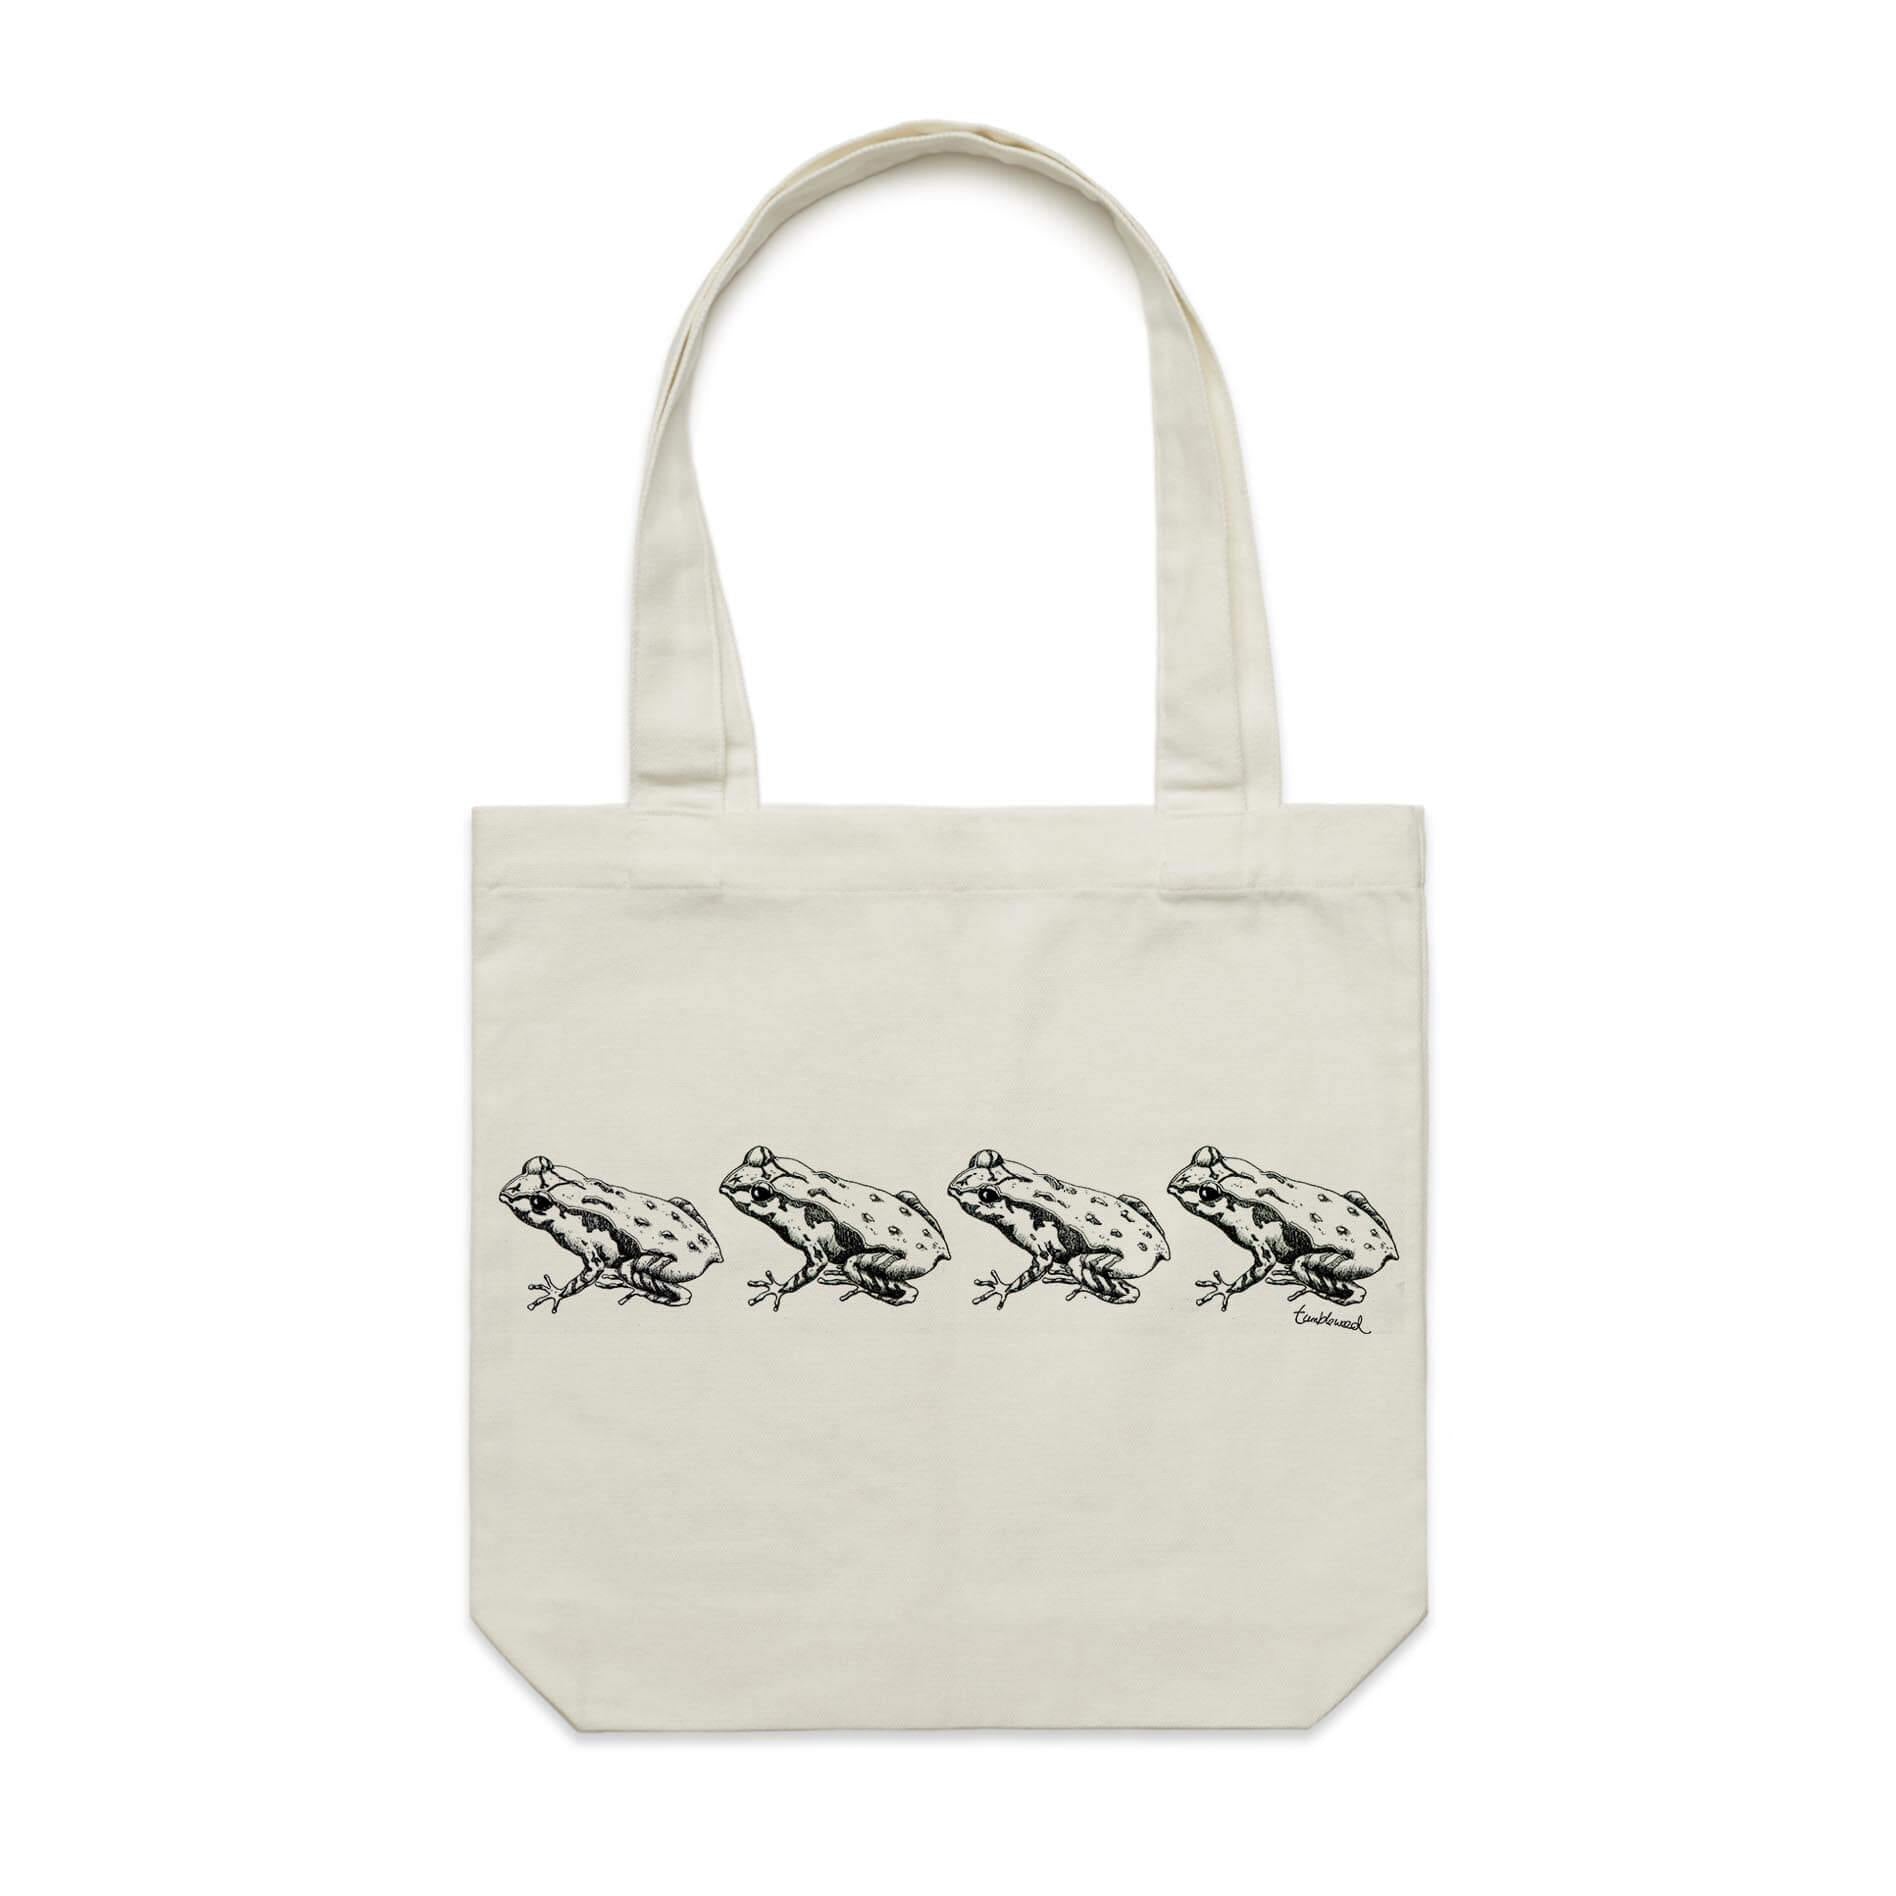 Cotton canvas tote bag with a screen printed Archey's Frog design.